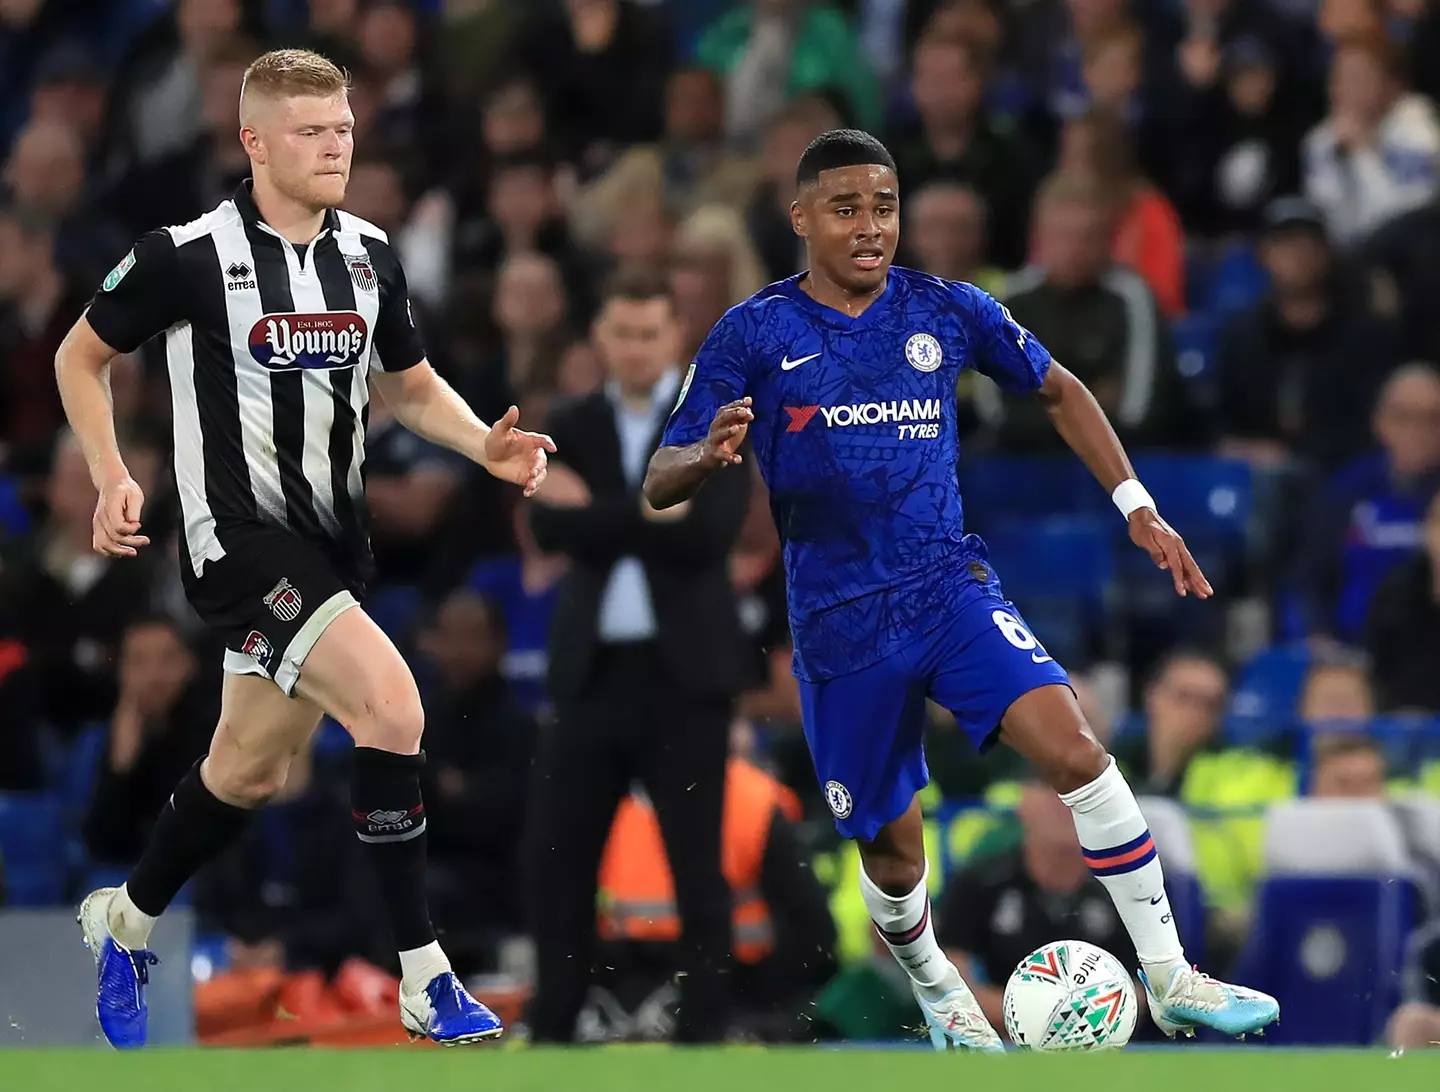 Ian Maatsen for Chelsea in the Carabao Cup against Grimsby Town. (Alamy)